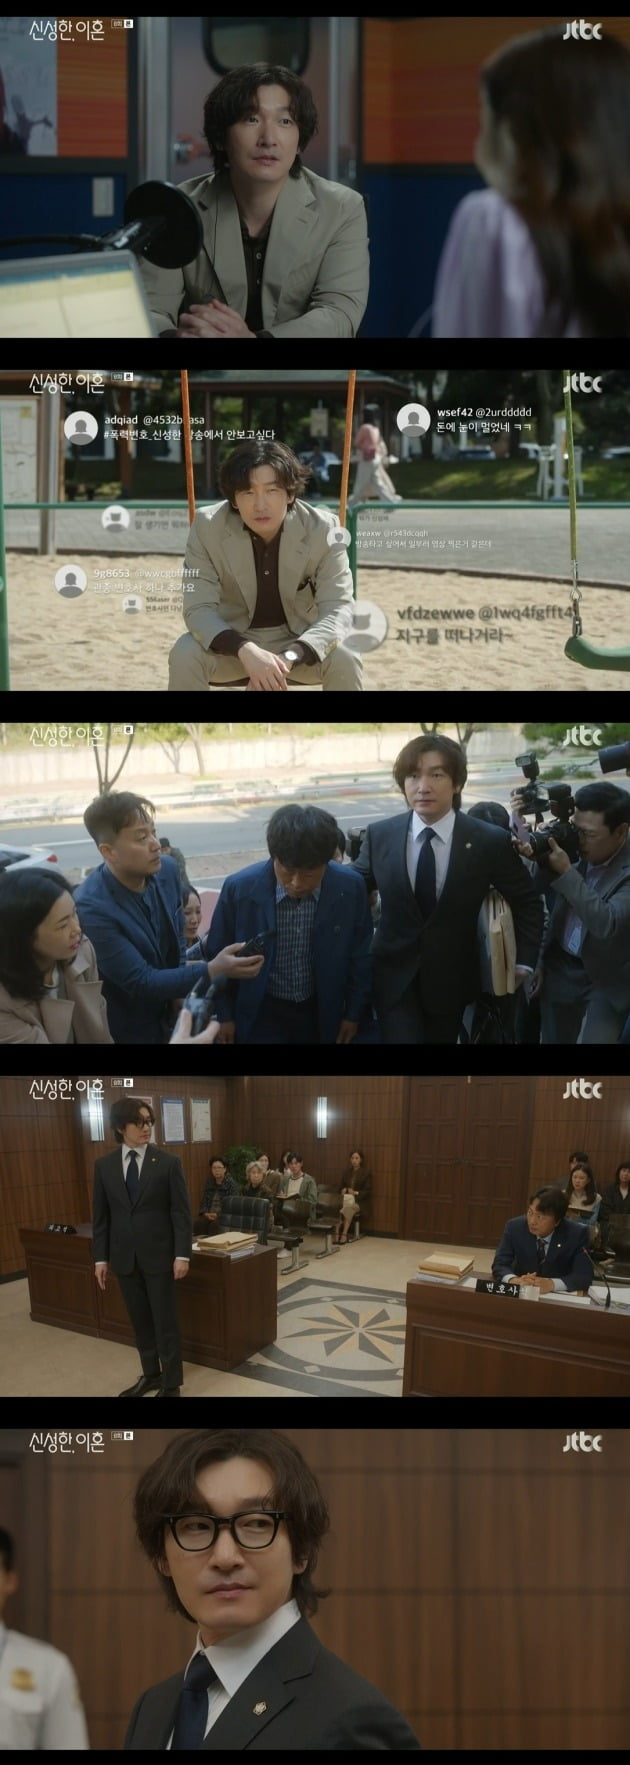 Jo Seung-woo hit the nail on the head with a question that penetrated the essence of the case.In the 8th JTBC Saturday drama  ⁇  Divorce Attorney Shin  ⁇  8th broadcast on the 26th, a full-fledged face-to-face match with the Gold coin law firm was drawn.Charles V, Holy Roman Emperor (Jo Seung-woo) to get into trouble, and the skillful defense of Charles V, Holy Roman Emperor, who skillfully avoids it, gave a thrilling pleasure.On this day, in order to alleviate the interest of The Client Mae-Sup (Choi Jae-Sup), which became a social issue, Charles V, Holy Roman Emperor, It started with an anecdote.As soon as he was interested in Charles V, Holy Roman Emperor as the protagonist of the video that warmed up the Internet, he was told that he was defending Choi Jae-Sup, the husband of Dintihua. .Charles V, Holy Roman Emperor s The Client Ma Chun - suk has been criticized for being a portrait of migrant women s domestic violence as planned by the Gold coin law firm.Therefore, it was necessary to prepare for the lawsuit more meticulously than ever before, as did Park Yoo-seok (played by Jeon Bae-soo), the lawyer in charge of the other side, Dintihua.According to Dintihua, Ma Chun-suk was angry when his wife asked him to divorce him to return to his homeland with his baby, and when he returned home a few days later, he eventually hurt his arm by swinging violence.However, Ma Chun-seoks statement to Charles V, Holy Roman Emperor, was different: I never use violence because I was subjected to domestic violence from my father when I was a child. I wondered if either of them was true.Charles V, Holy Roman Emperor, had a question in this passage: I do not understand why my wife, who was threatened by her husband, came home again.After expecting to be hit by her husband, she contacted her in advance as if she were asking for salvation in a womans house, and after divorce she tried to go back to Vietnam.It was a marriage that I chose to go to Korea because I had a lot of younger siblings to feed, but it was not easy to understand that I would go back to Vietnam with my child.In addition, according to Charles V, a friend of Holy Roman Emperor, Jang Hyung-keun (Kim Sung-kyun) and Cho Jung-sik (Jung Moon-sung), according to the investigation of Haenam, Ma Chun-seok worked hard to feed his wifes family in Vietnam.Rather, it was said that the wife of Vietnam, who does not speak much even if she goes to the Korean language institute faithfully, is strange.In a situation where it is not yet clear what the truth is, Charles V, Holy Roman Emperor, went directly to Haenam.I also heard about how I met my wife in Vietnam and how I decided to marry her.However, since good hearts do not necessarily result in truth, Charles V, Holy Roman Emperor, asked Ma Chun-suk and furthermore, Dintihua, who met in court, asked the important question of whether his son Ma Young-kwang was a child of Ma Chun-suk.This issue is the most important variable to prove Honorary Retrieval, and Park Yoo-suk also asked the same question before the trial.After the strict appearance of Charles V, Holy Roman Emperor, who asked for the paternity test of Ma Chun-suk and Dintihua, the 8th was completed.It is noteworthy how Jo Seung-woo, who pierced the core of the incident, and Jo Seung-woo will be able to solve the unfairness of The Client and Retrieval of Honor. ⁇  Divorce Attorney Shin  ⁇  9 times will be broadcast on April 1 at 10:30 pm.